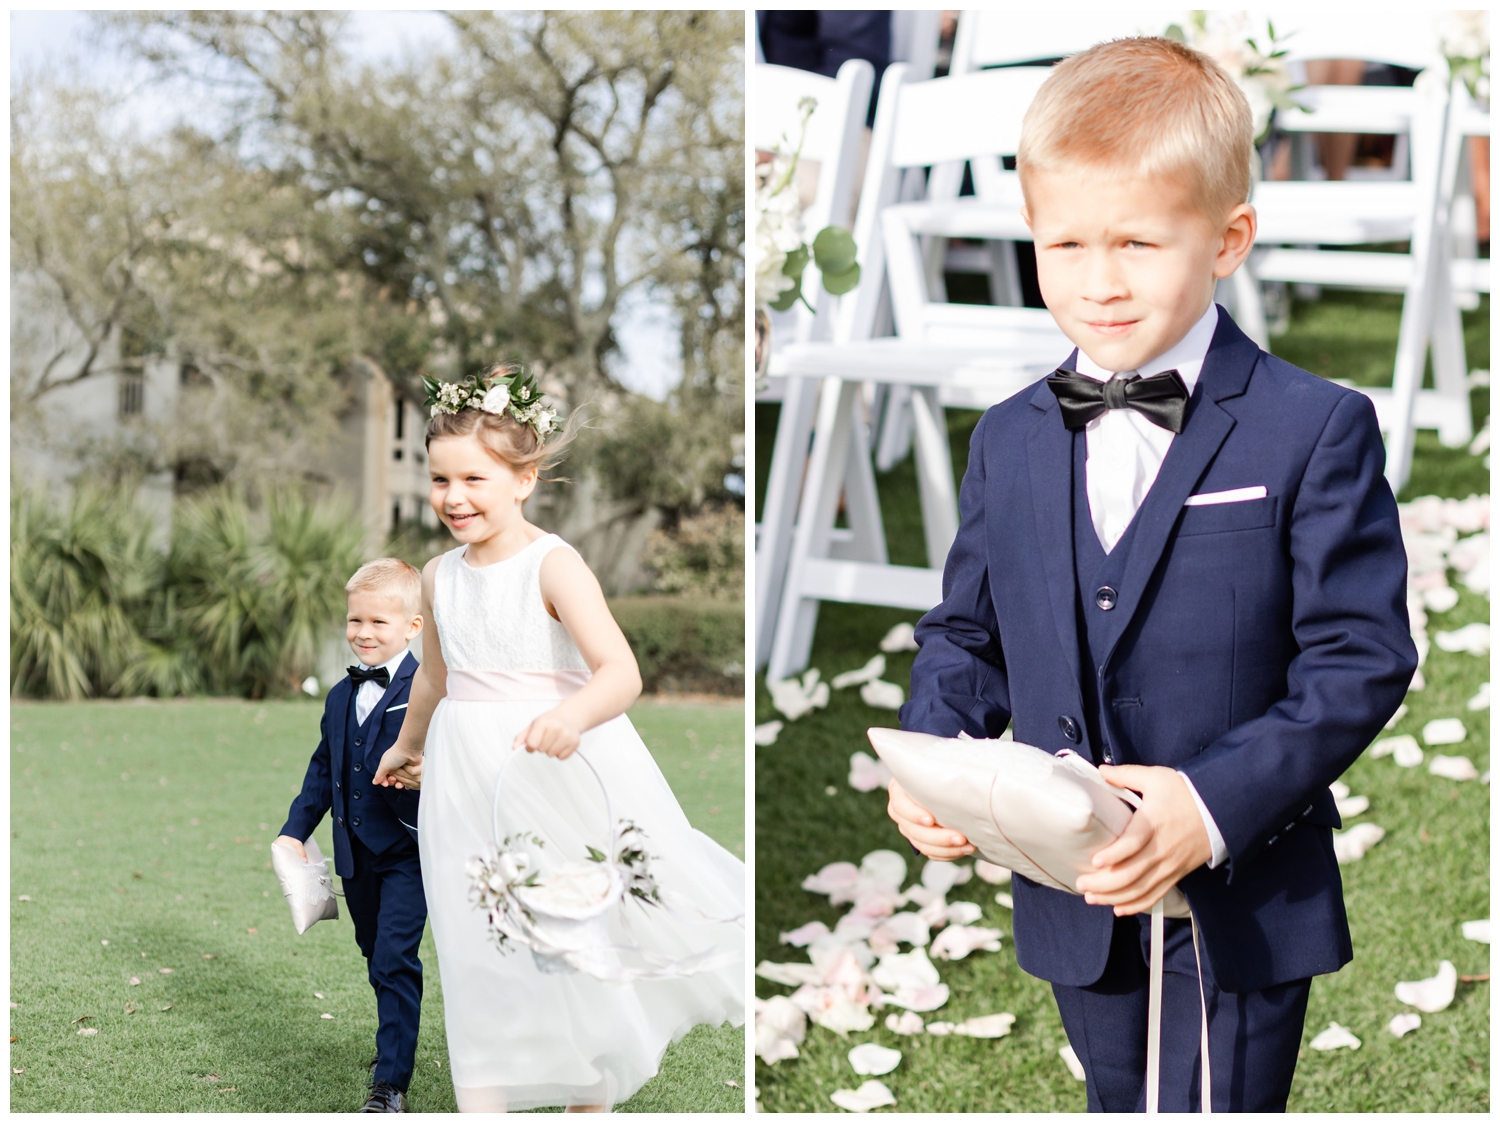 flower girl and ring bearer walking down the aisle at outdoor wedding ceremony in Hilton Head